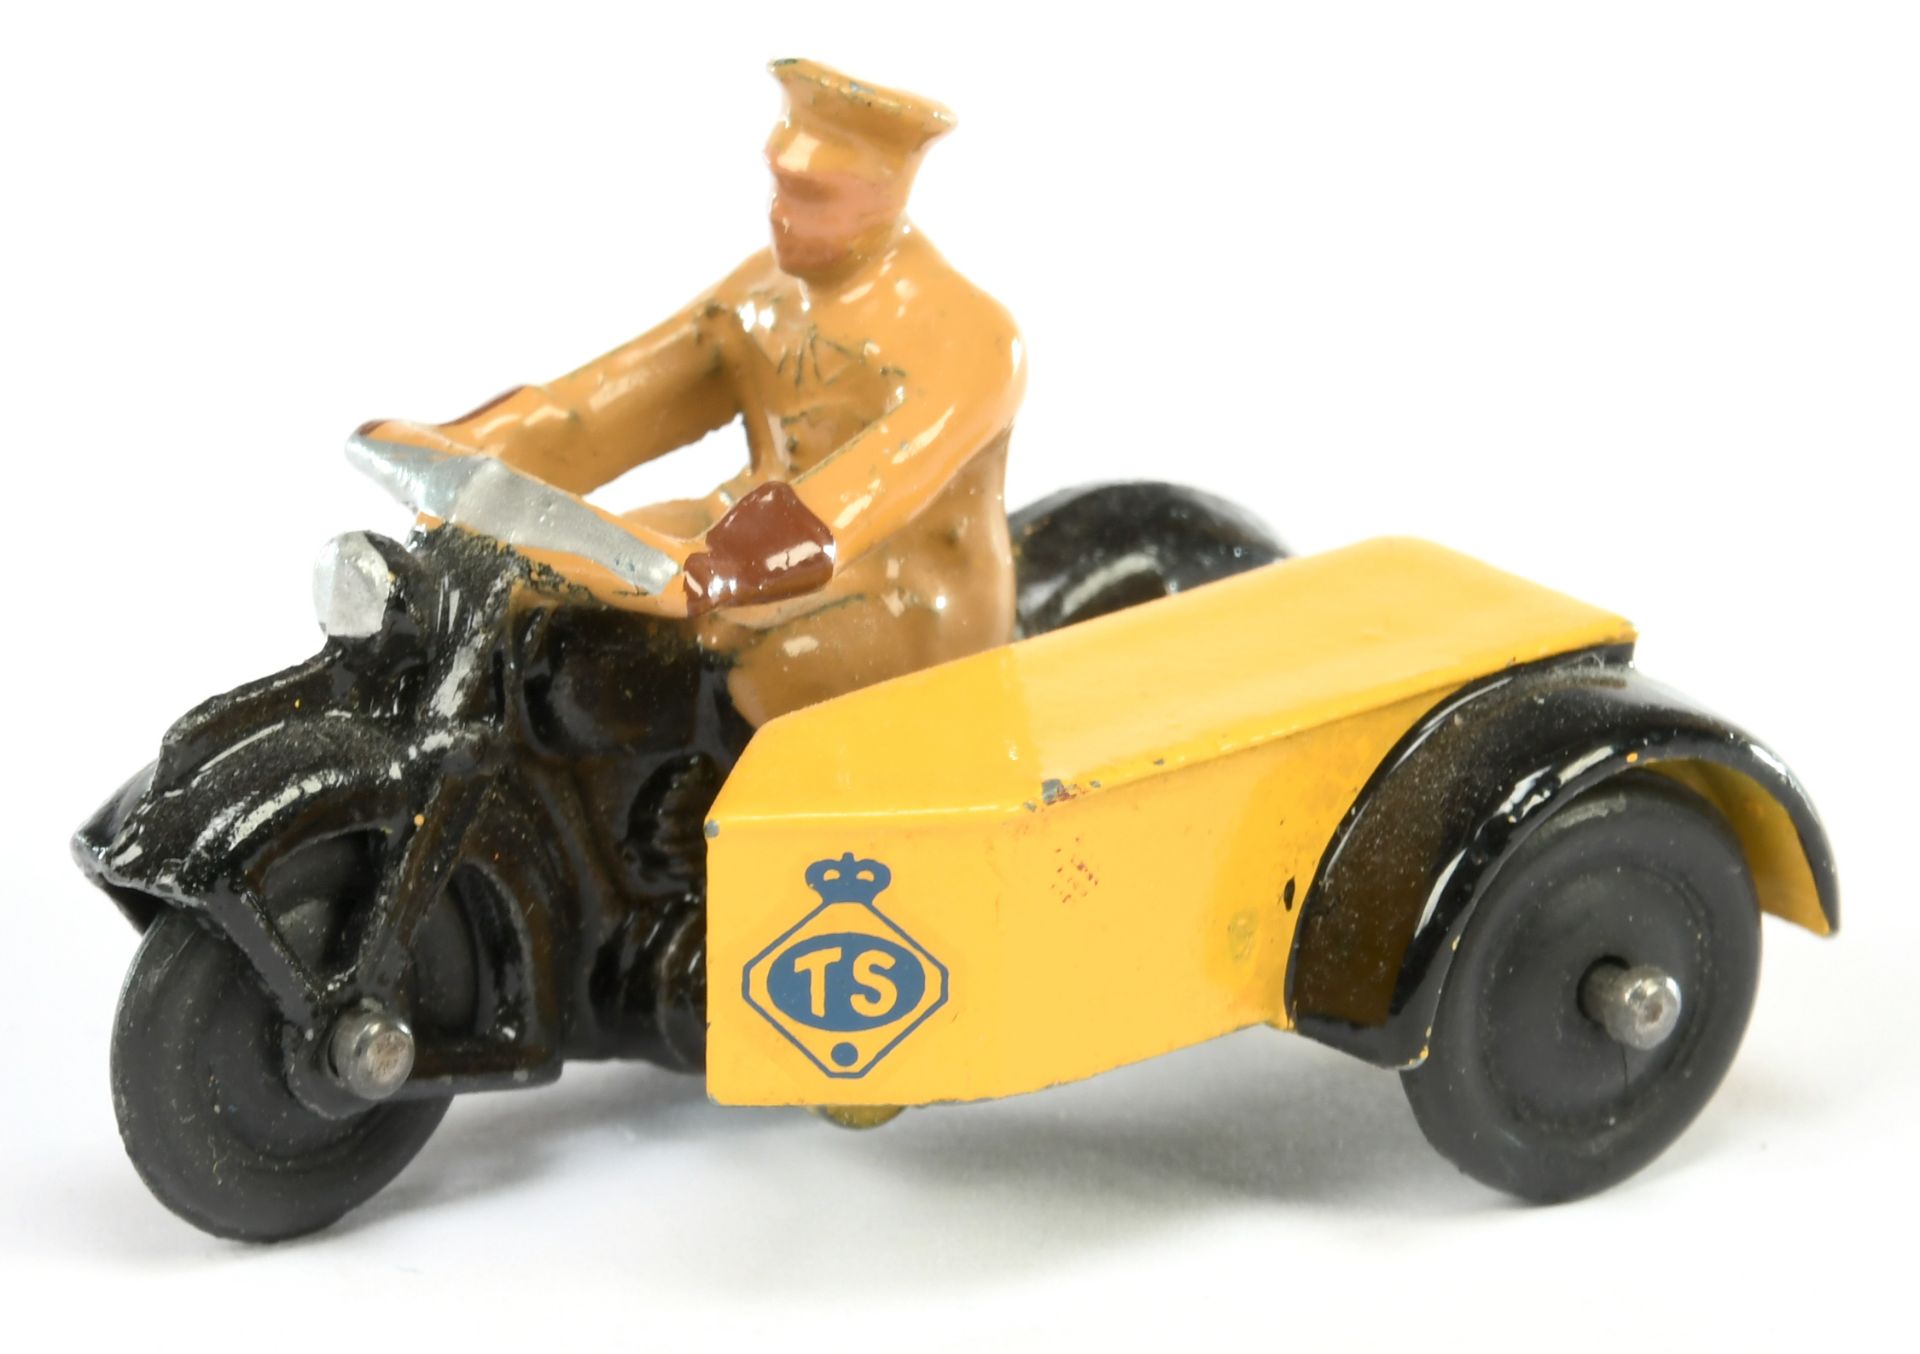 Dinky Toys 271 "TS" Motorcycle and Sidecar Export Issue - Yellow and Black with tan rider and sol...